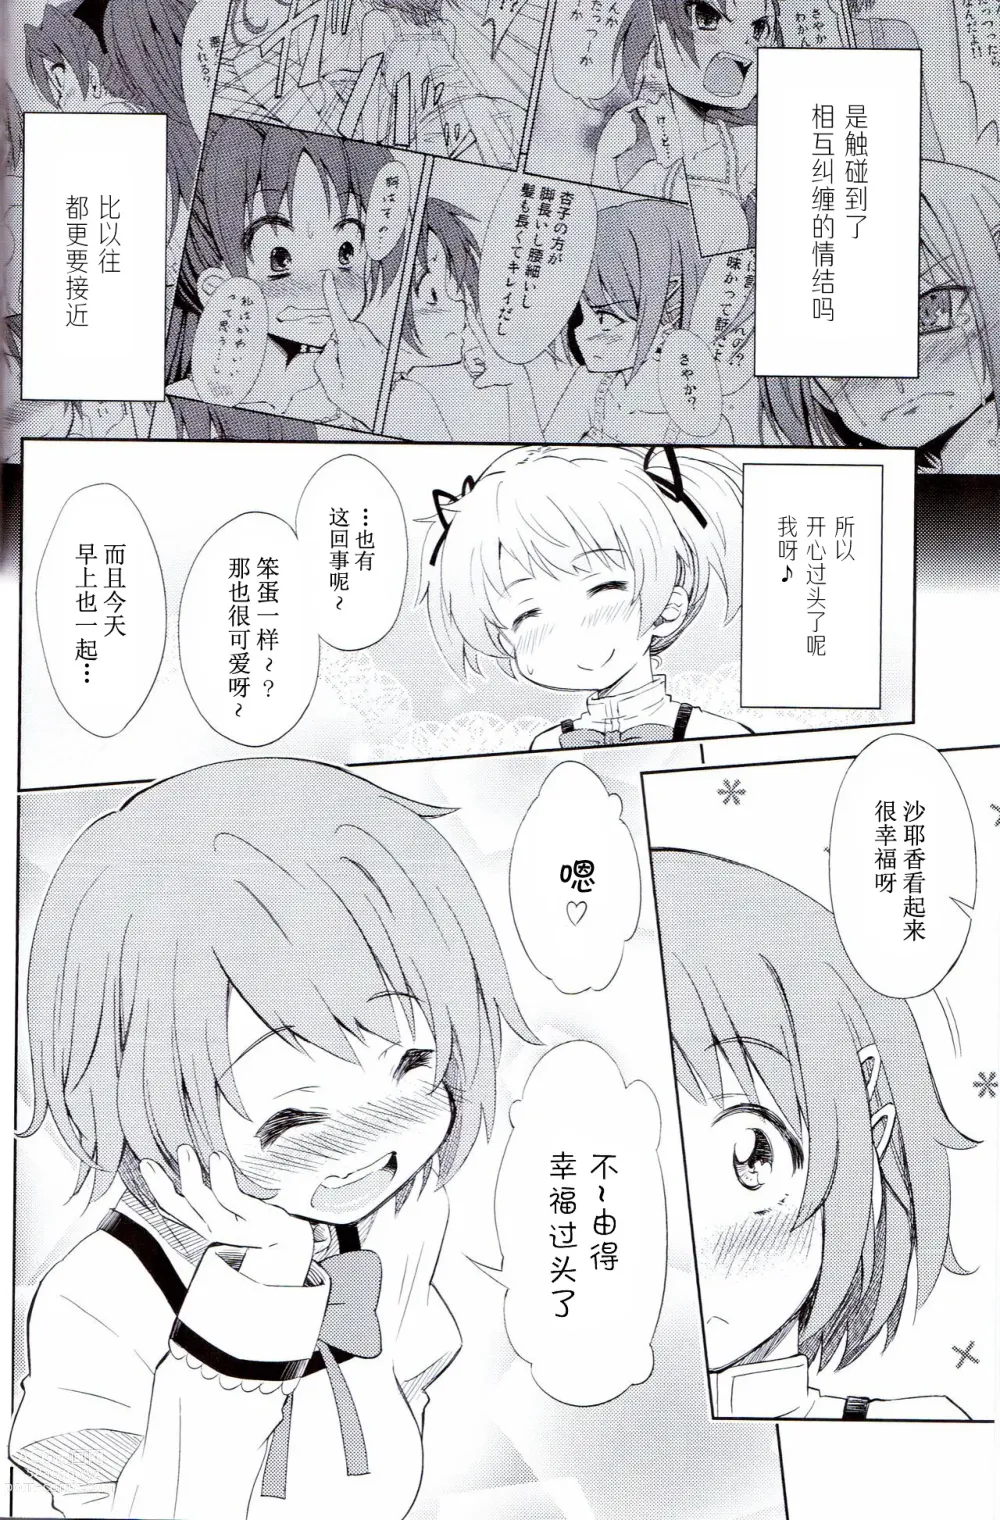 Page 5 of doujinshi Lovely Girls Lily vol. 5